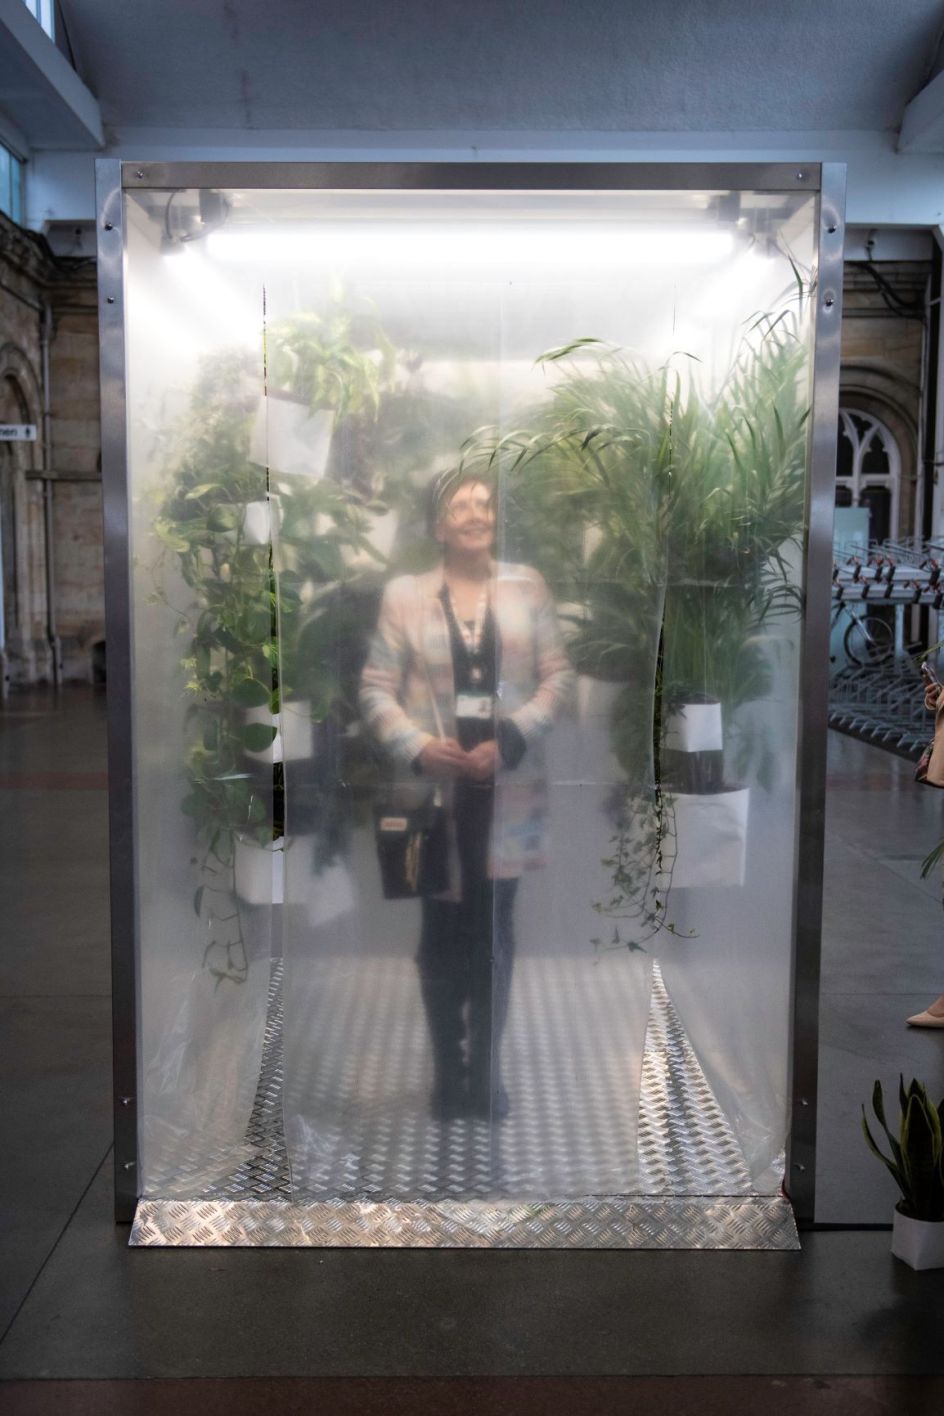 Lung cleaning cube at Middlesbrough railway station. Image credit: Tracy Kidd